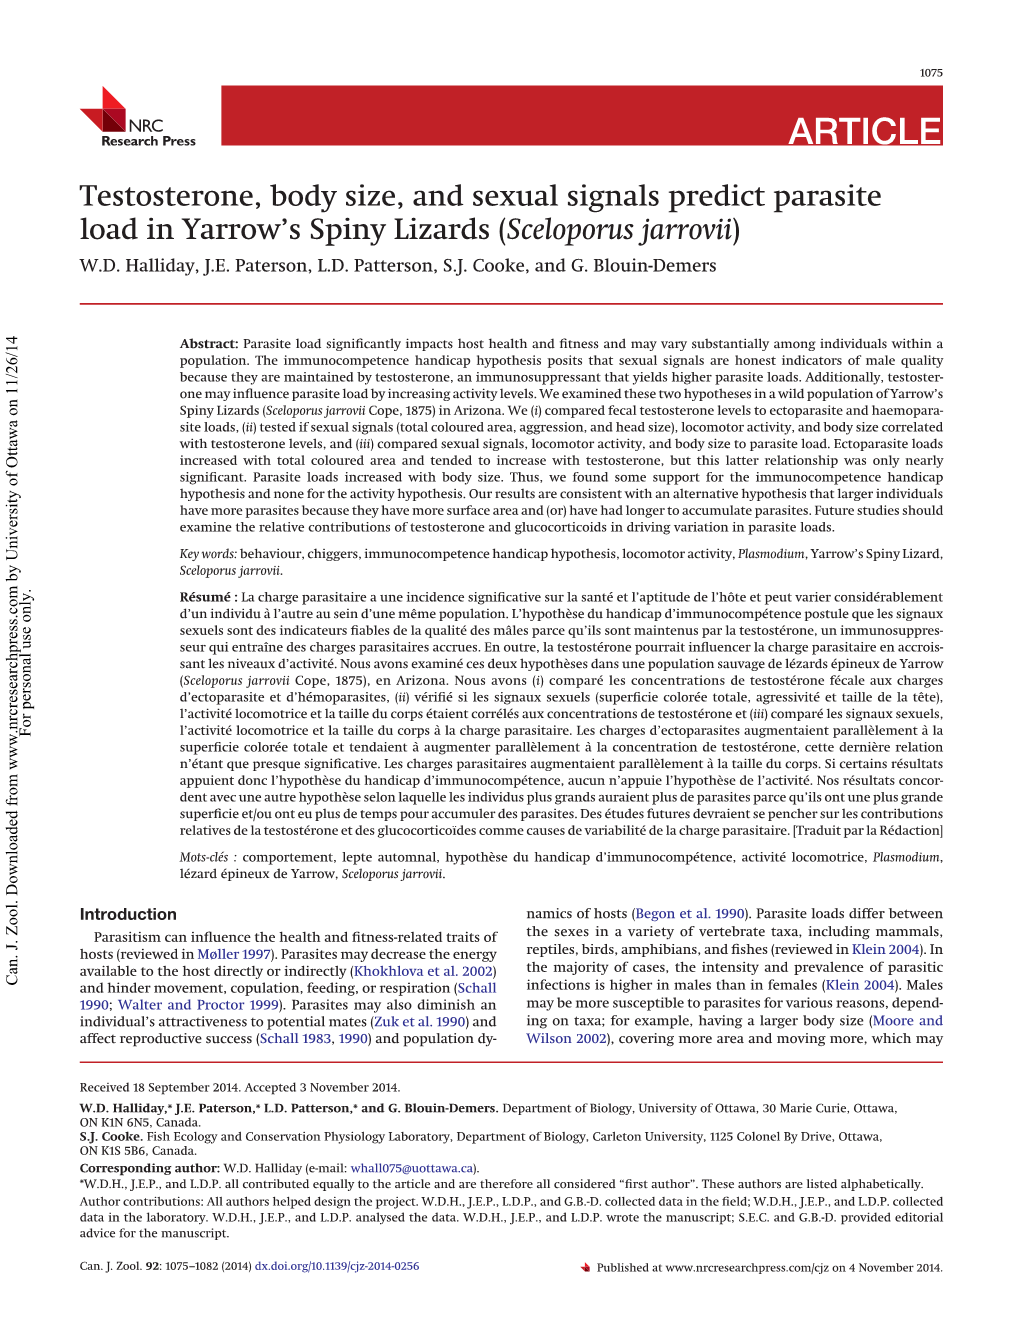 Testosterone, Body Size, and Sexual Signals Predict Parasite Load in Yarrow’S Spiny Lizards (Sceloporus Jarrovii) W.D